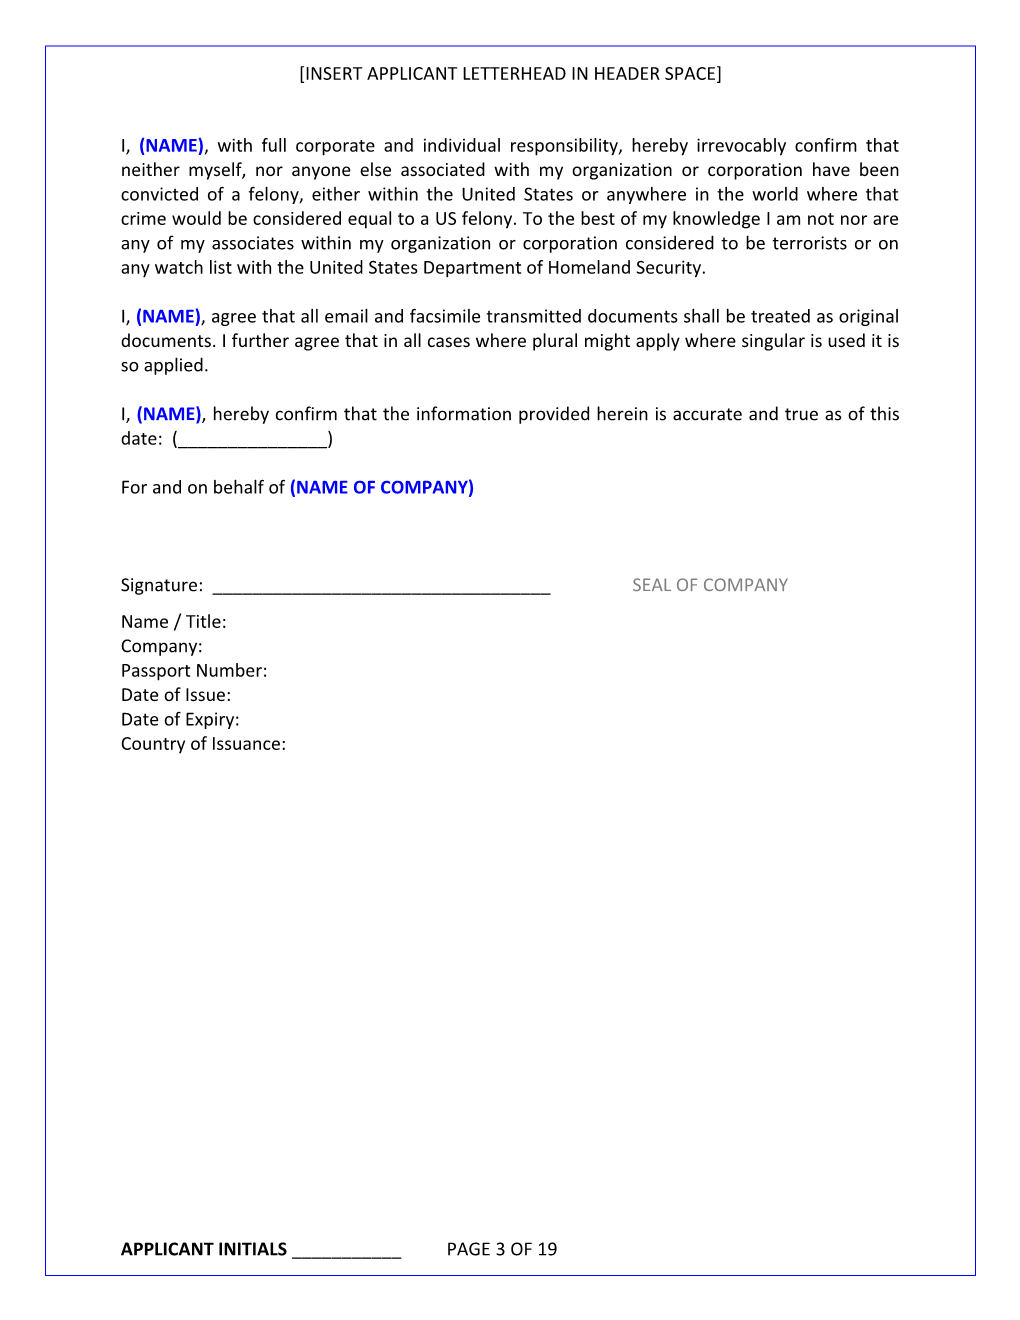 DRAFT Forms for CORPORATE APPLICATION